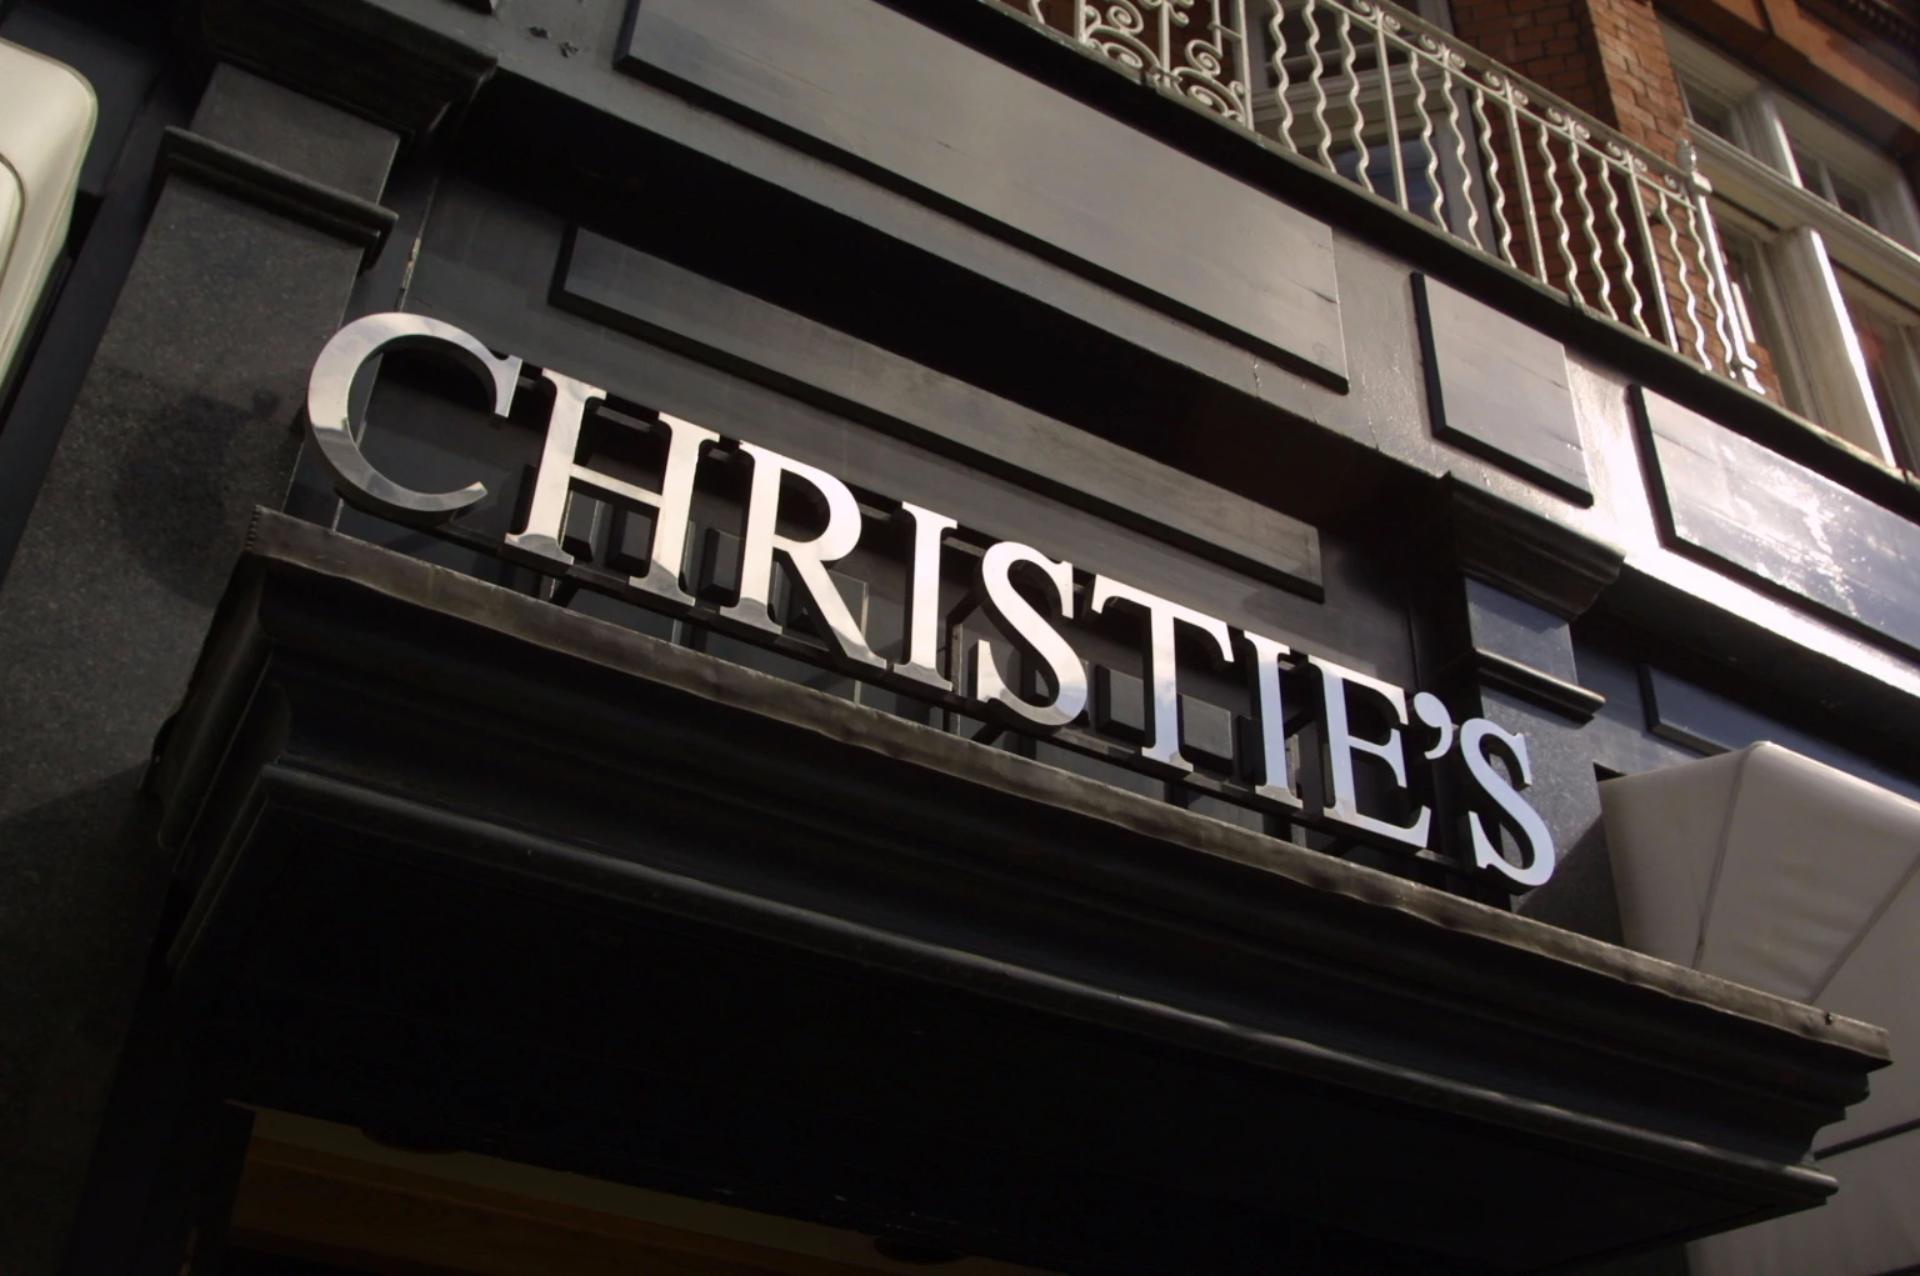 Christie's has launched a new tech investment platform Ventures © Getty Images